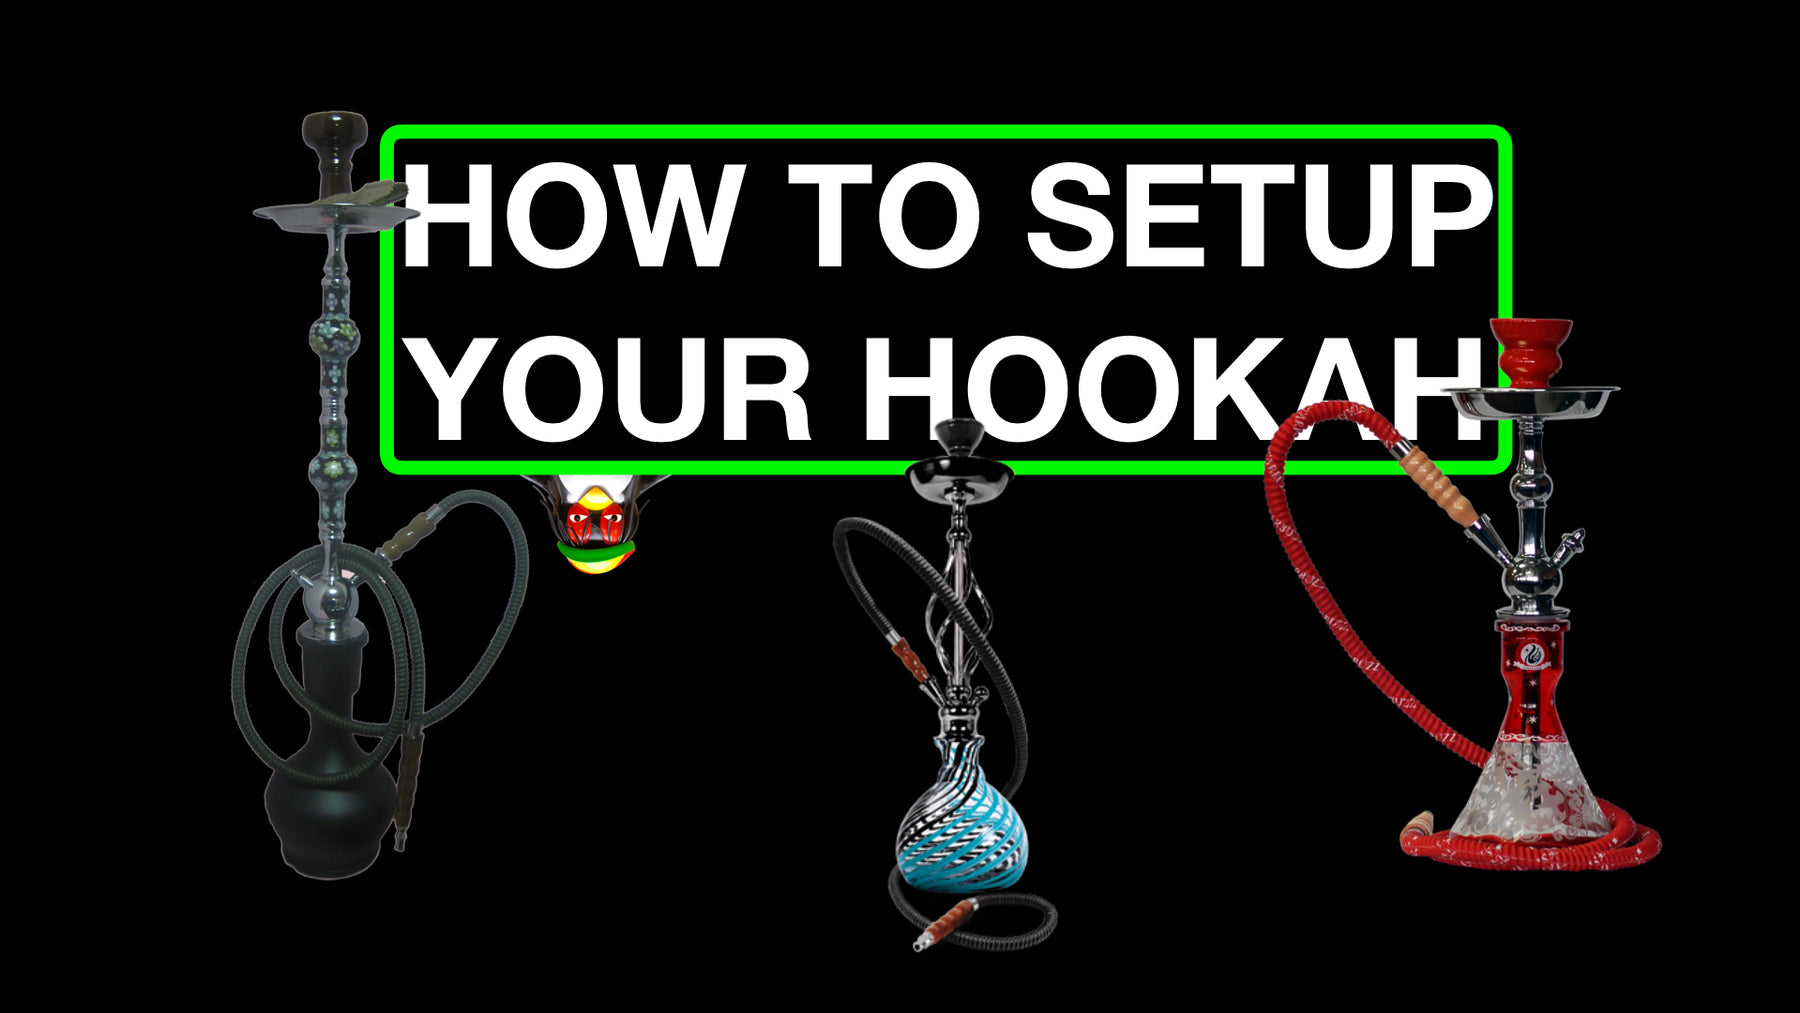 How to setup your hookah